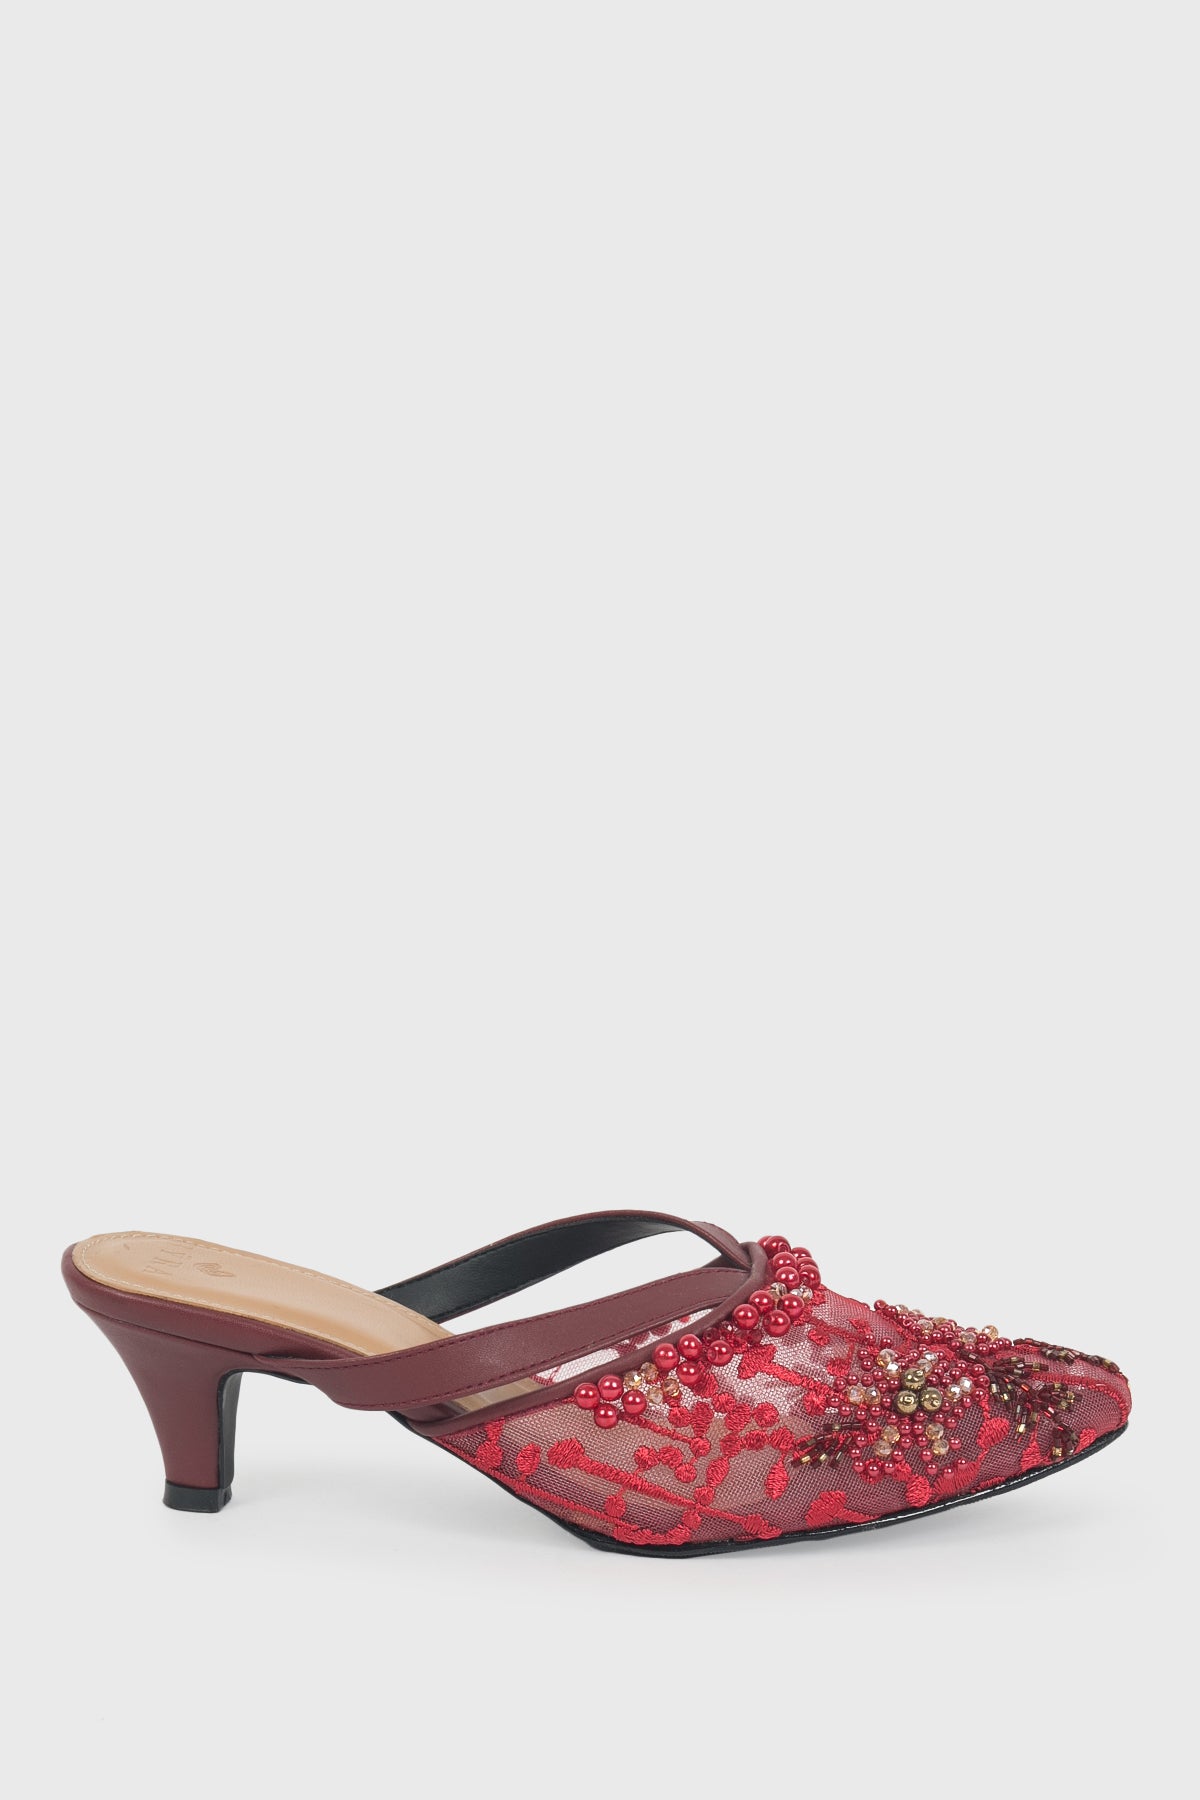 Faye Shoes in Red